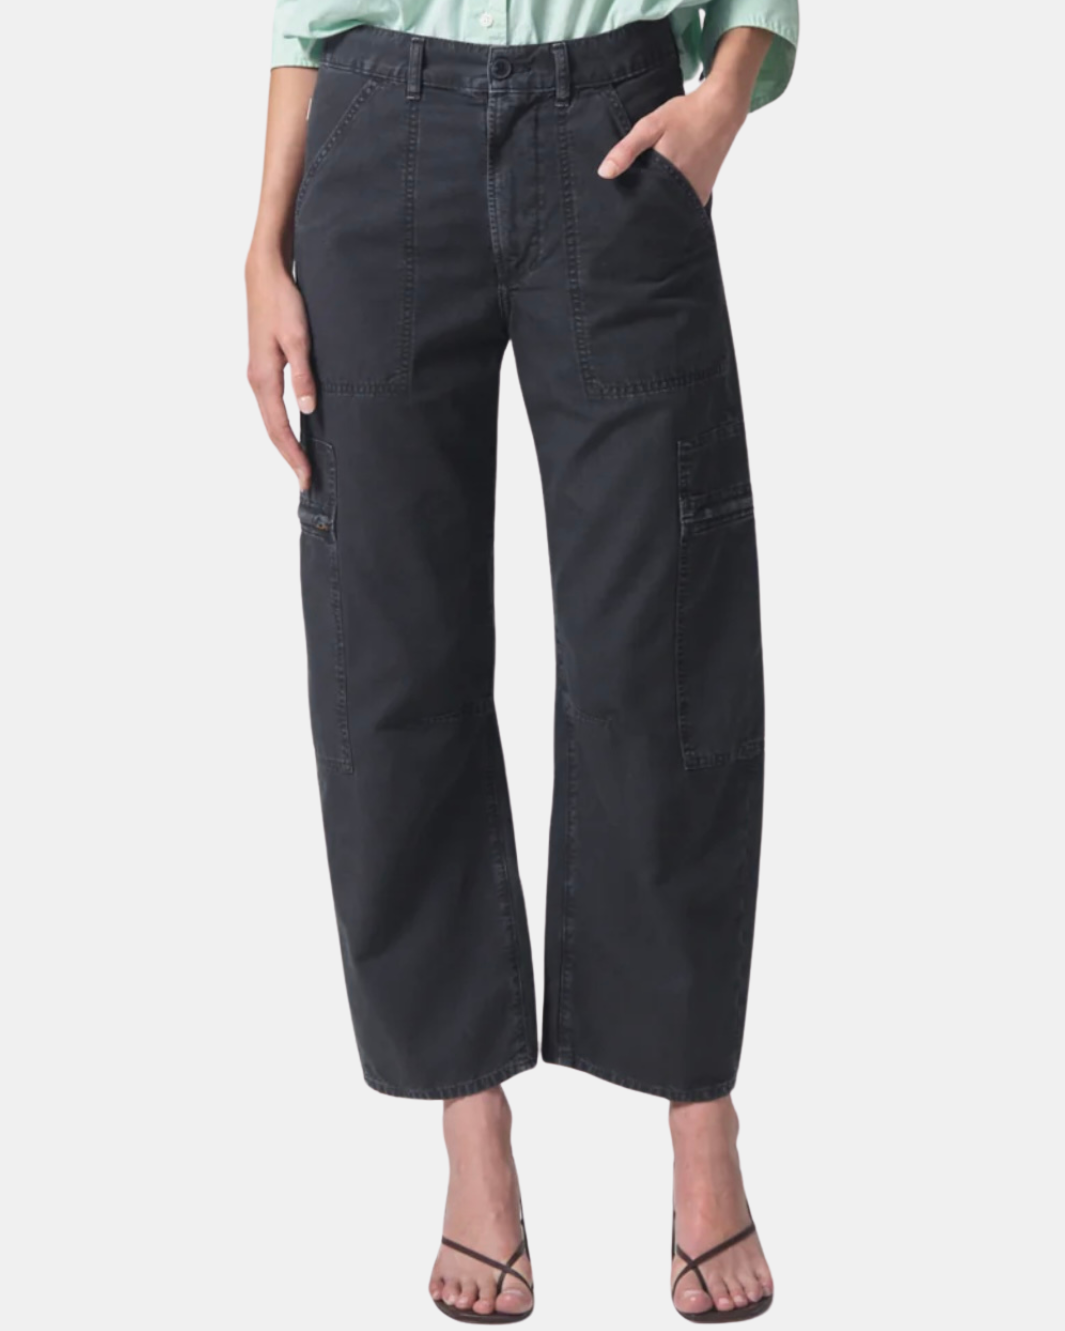 MARCELLE LOW SLUNG EASY CARGO IN WASHED BLACK - Romi Boutique